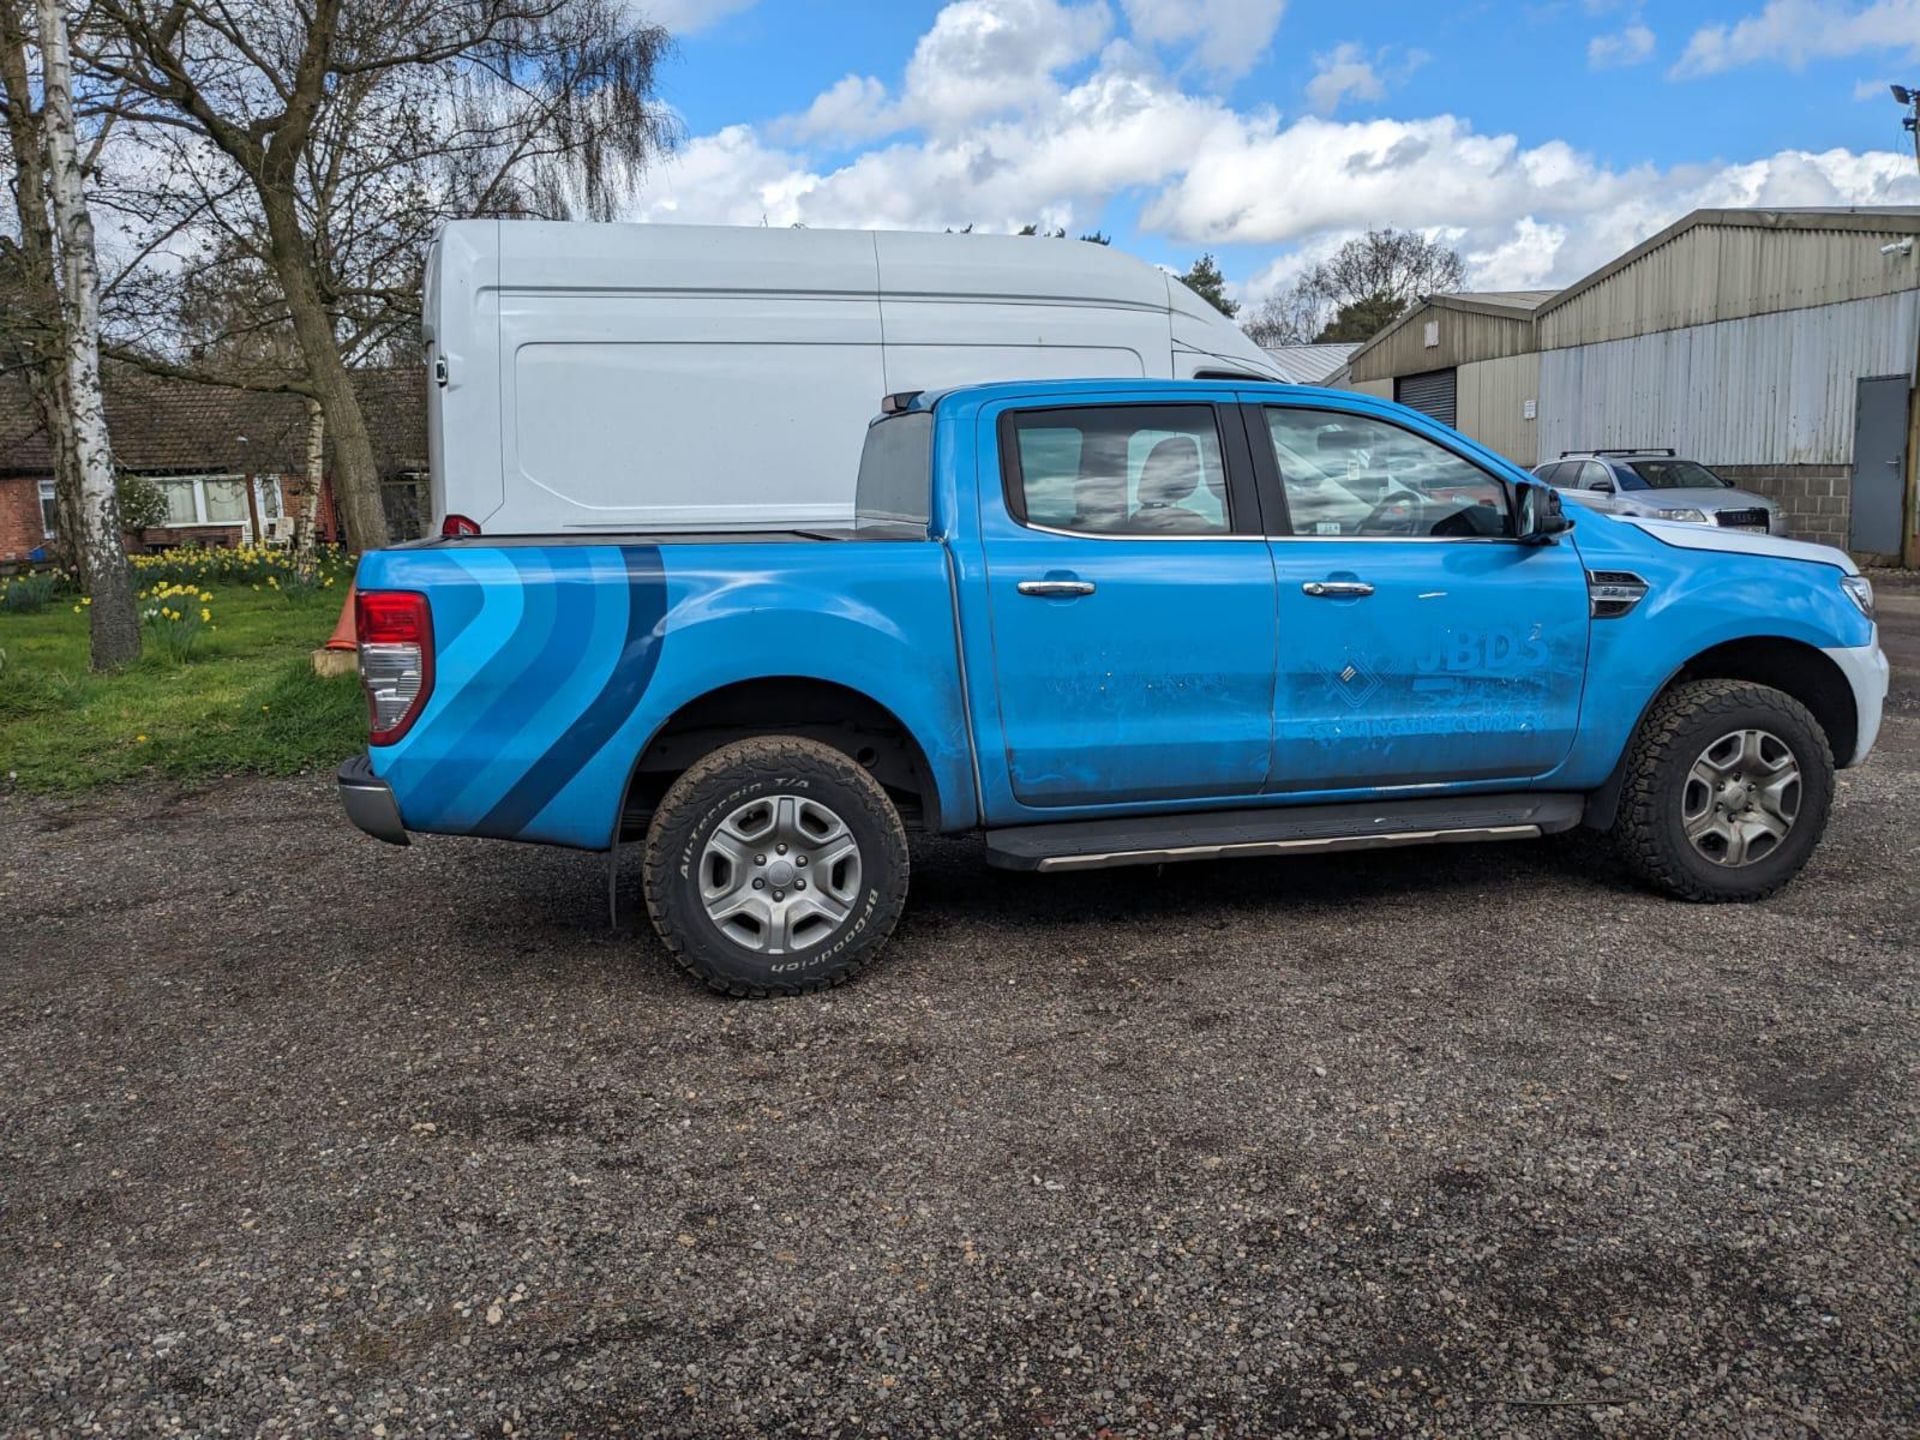 2018 18 FORD RANGER LIMITED PICK - 133K MILES - LEATHER SEATS - ALLOY WHEELS WITH BF GOODRICH TYRES - Image 3 of 4